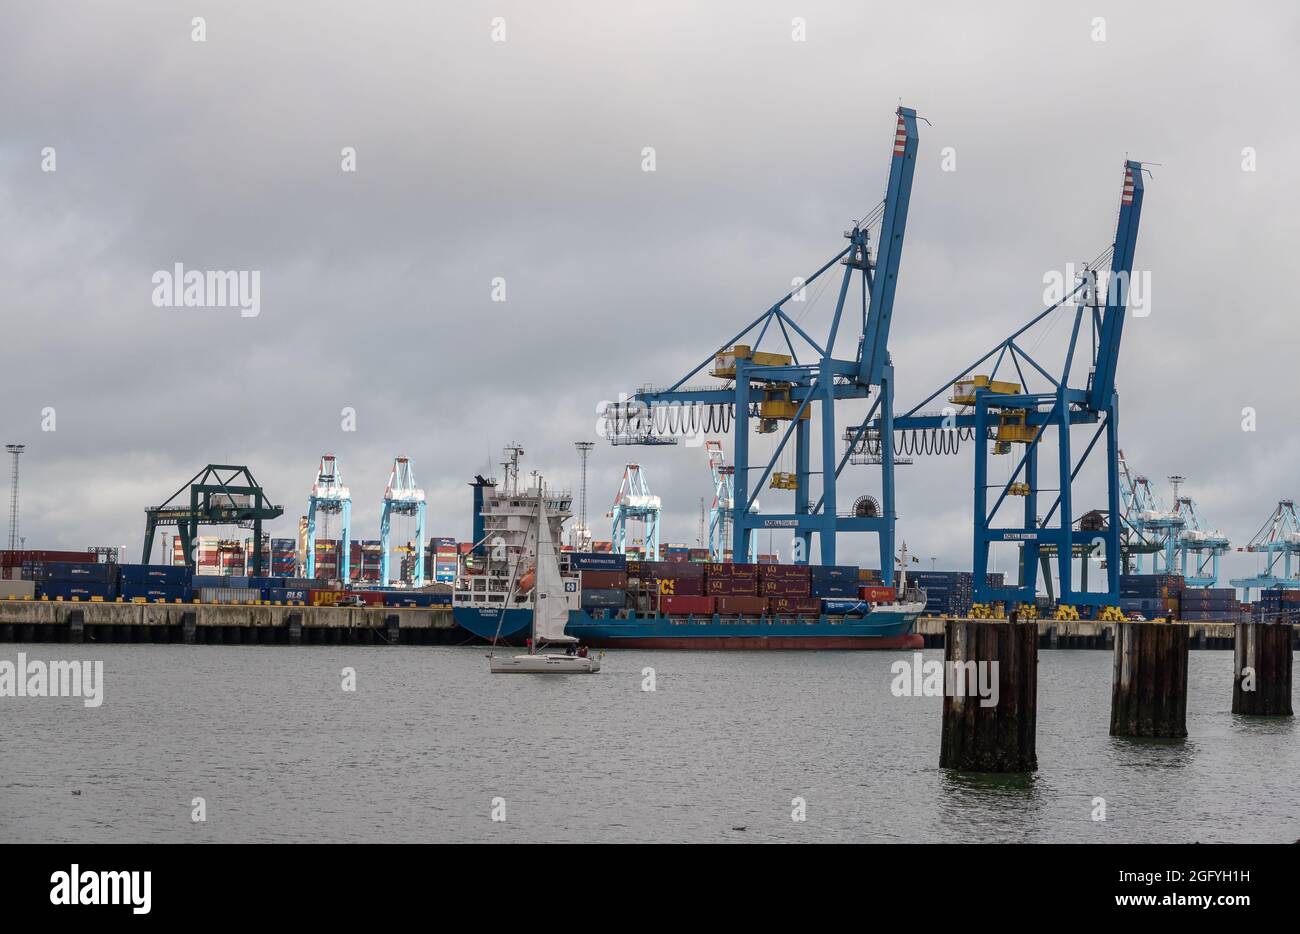 Zeebrugge Port, Belgium - August 6, 2021: White sailing yachts passes in front of container terminal tall blue cranes and ship, as it heads to the yac Stock Photo